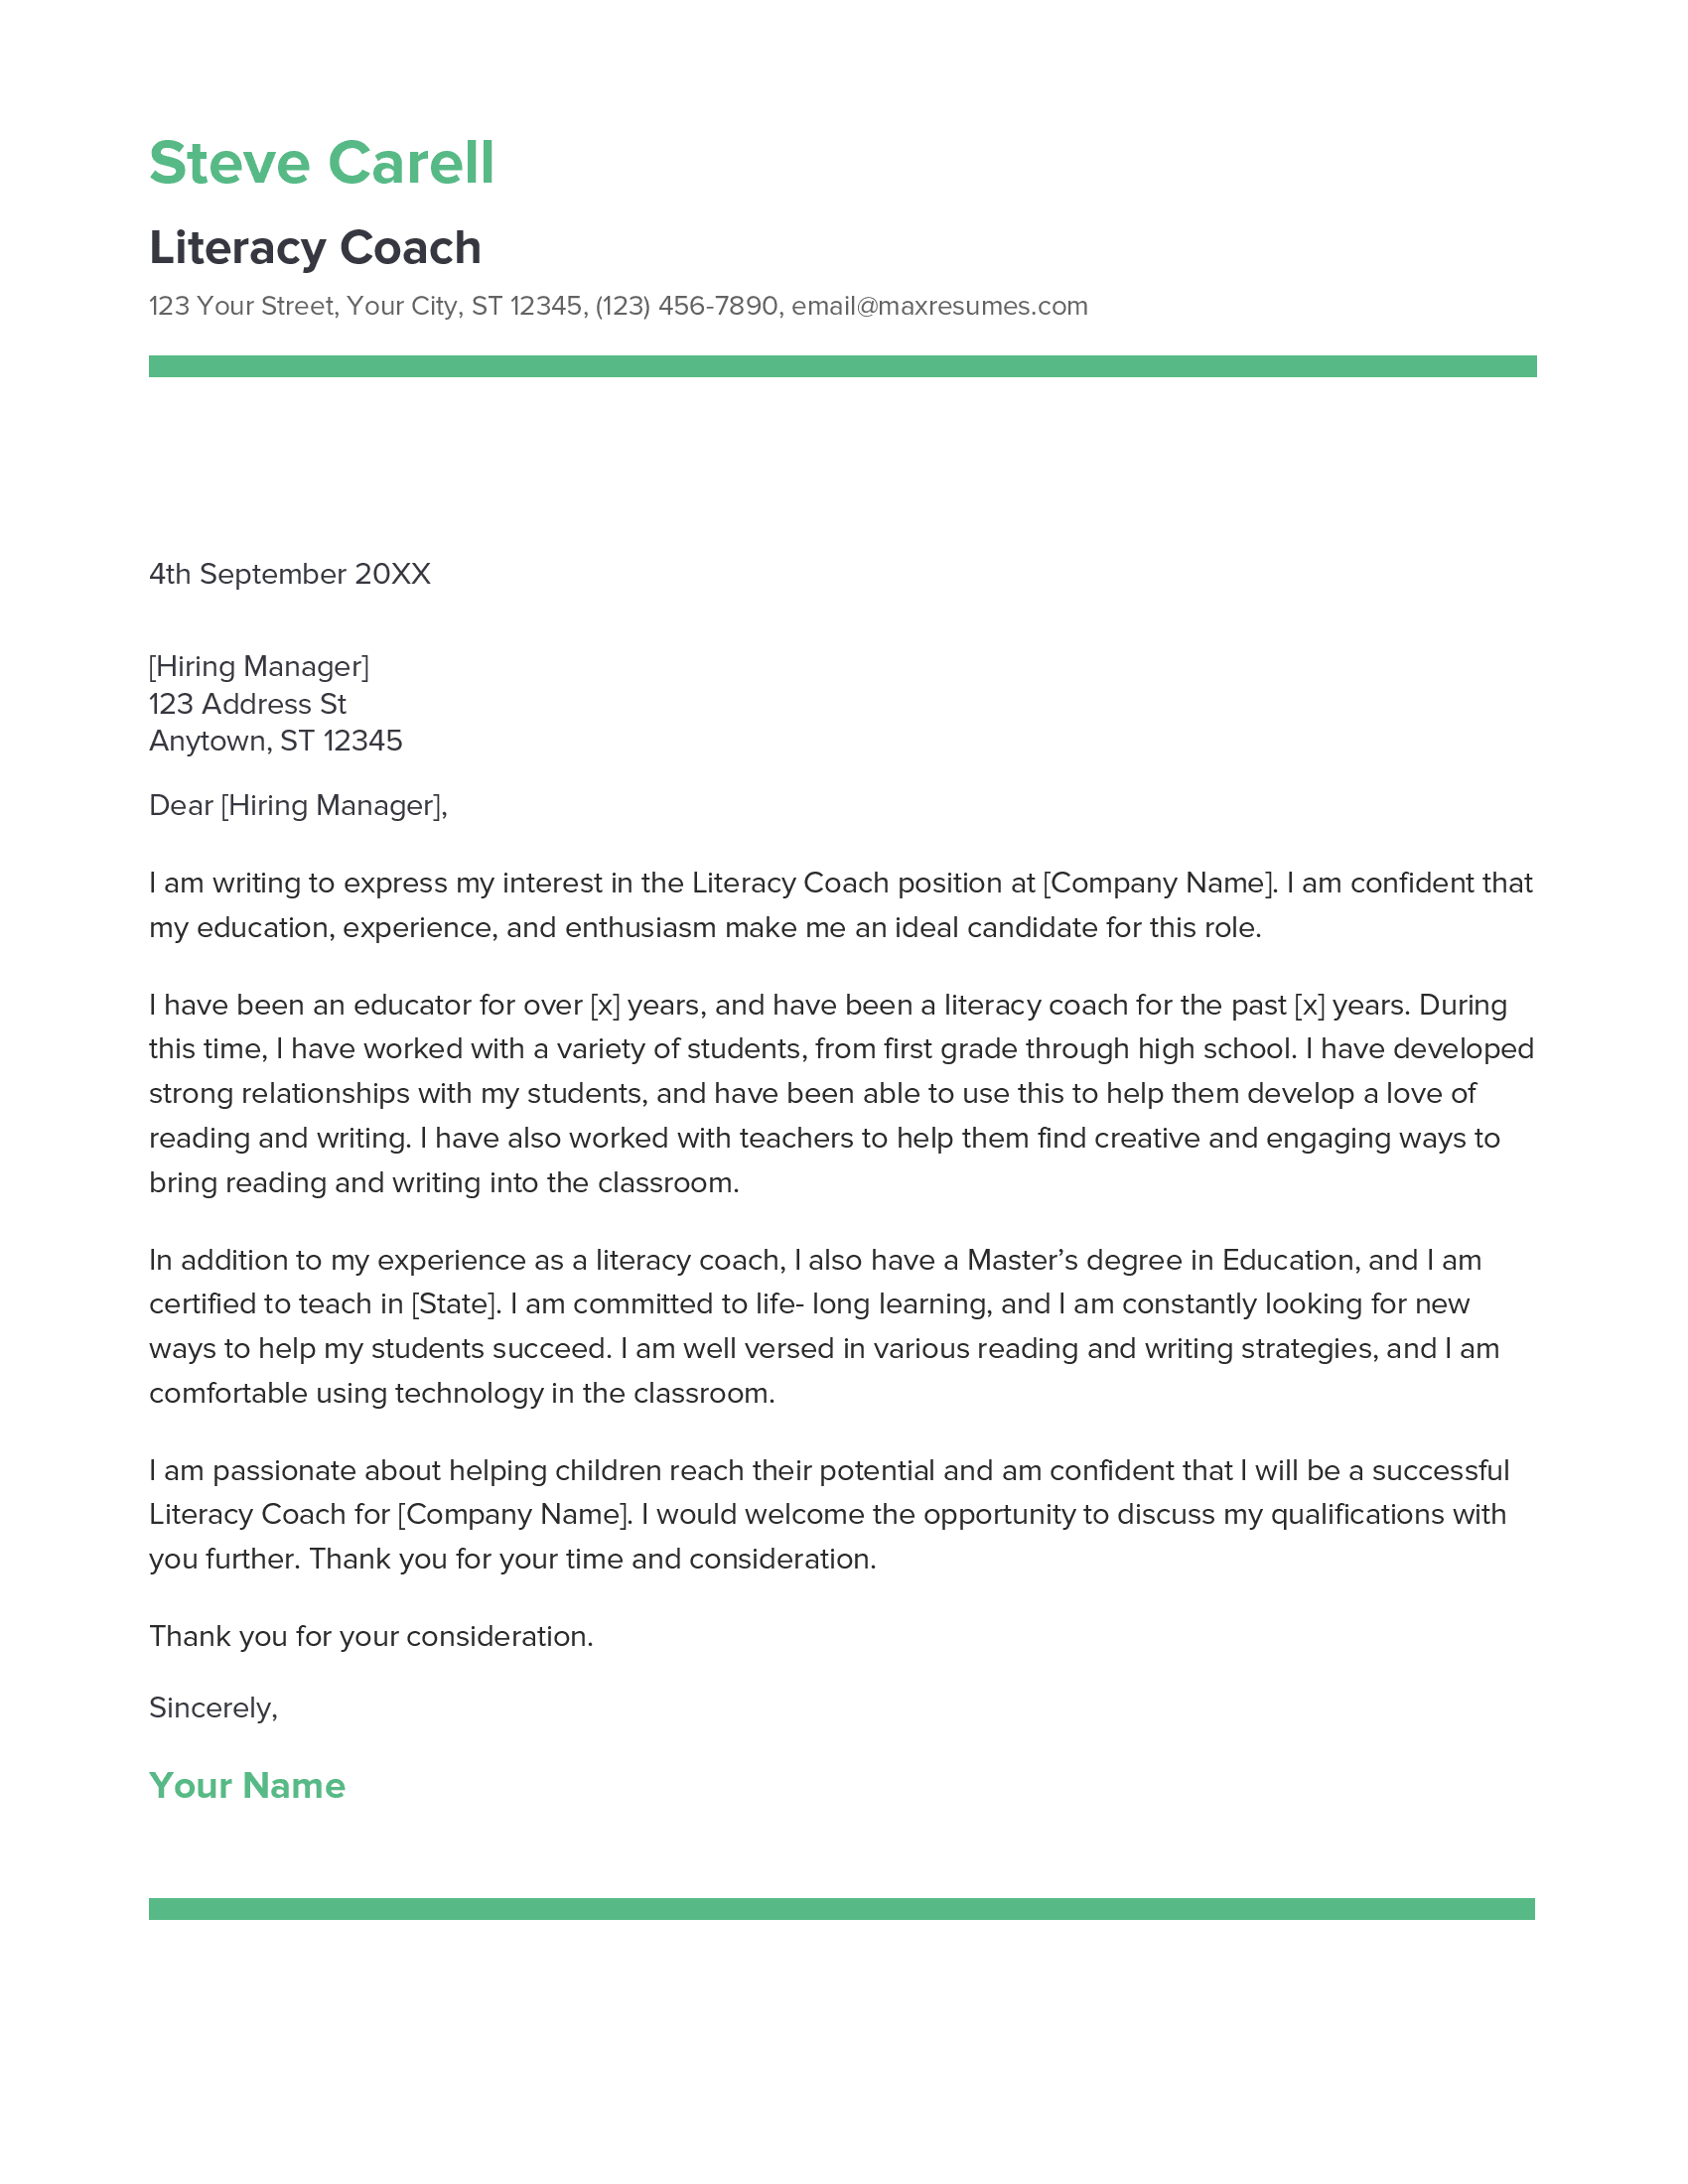 Literacy Coach Cover Letter Example